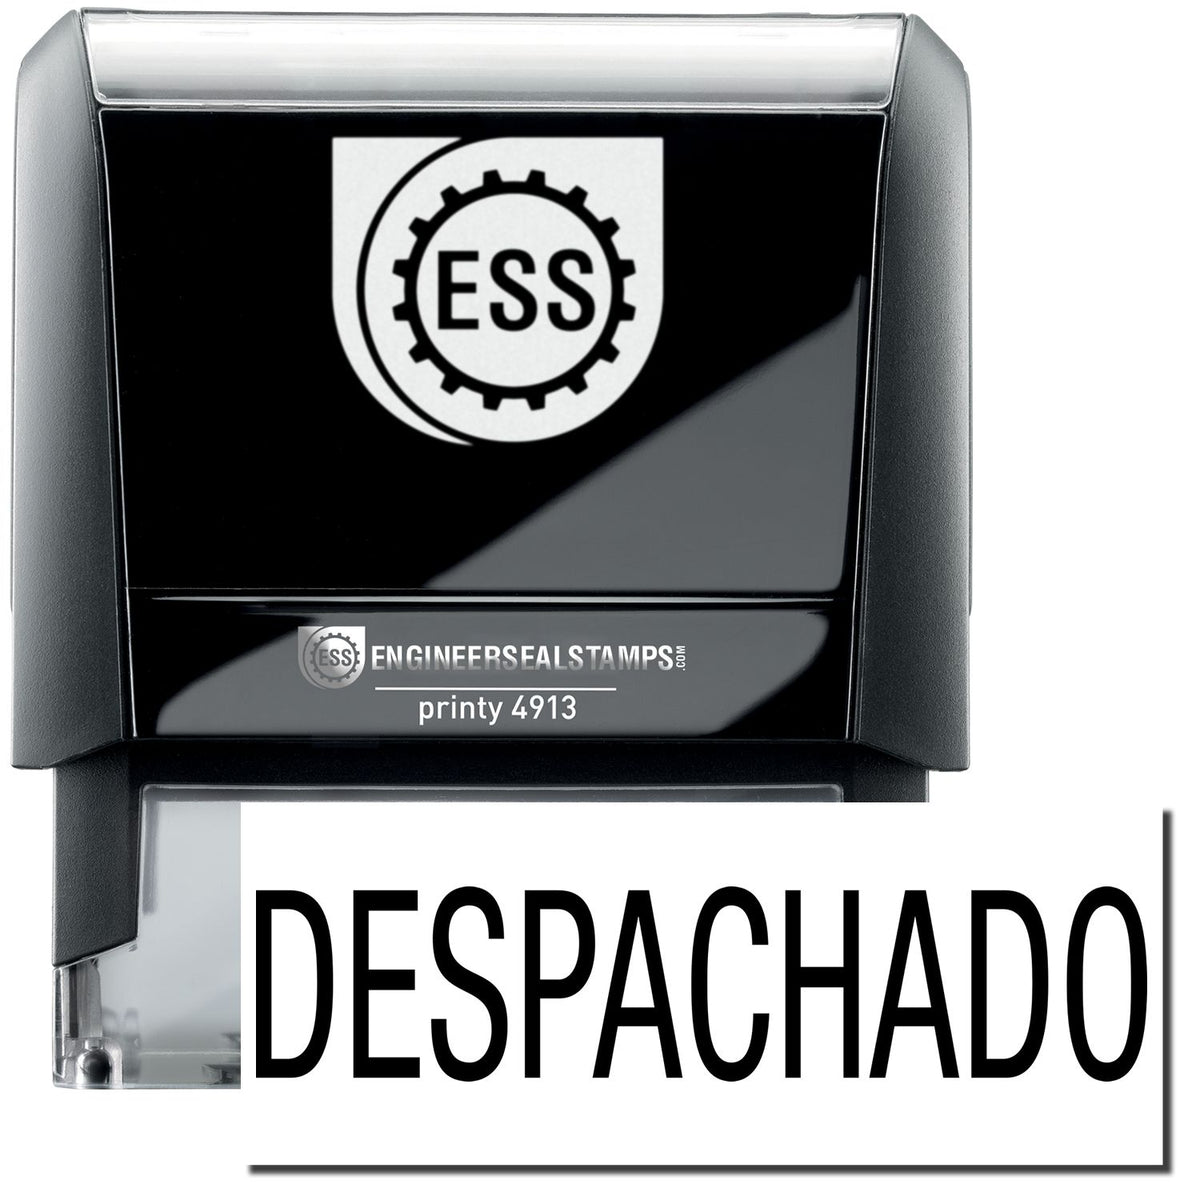 A self-inking stamp with a stamped image showing how the text &quot;DESPACHADO&quot; in a large font is displayed by it after stamping.